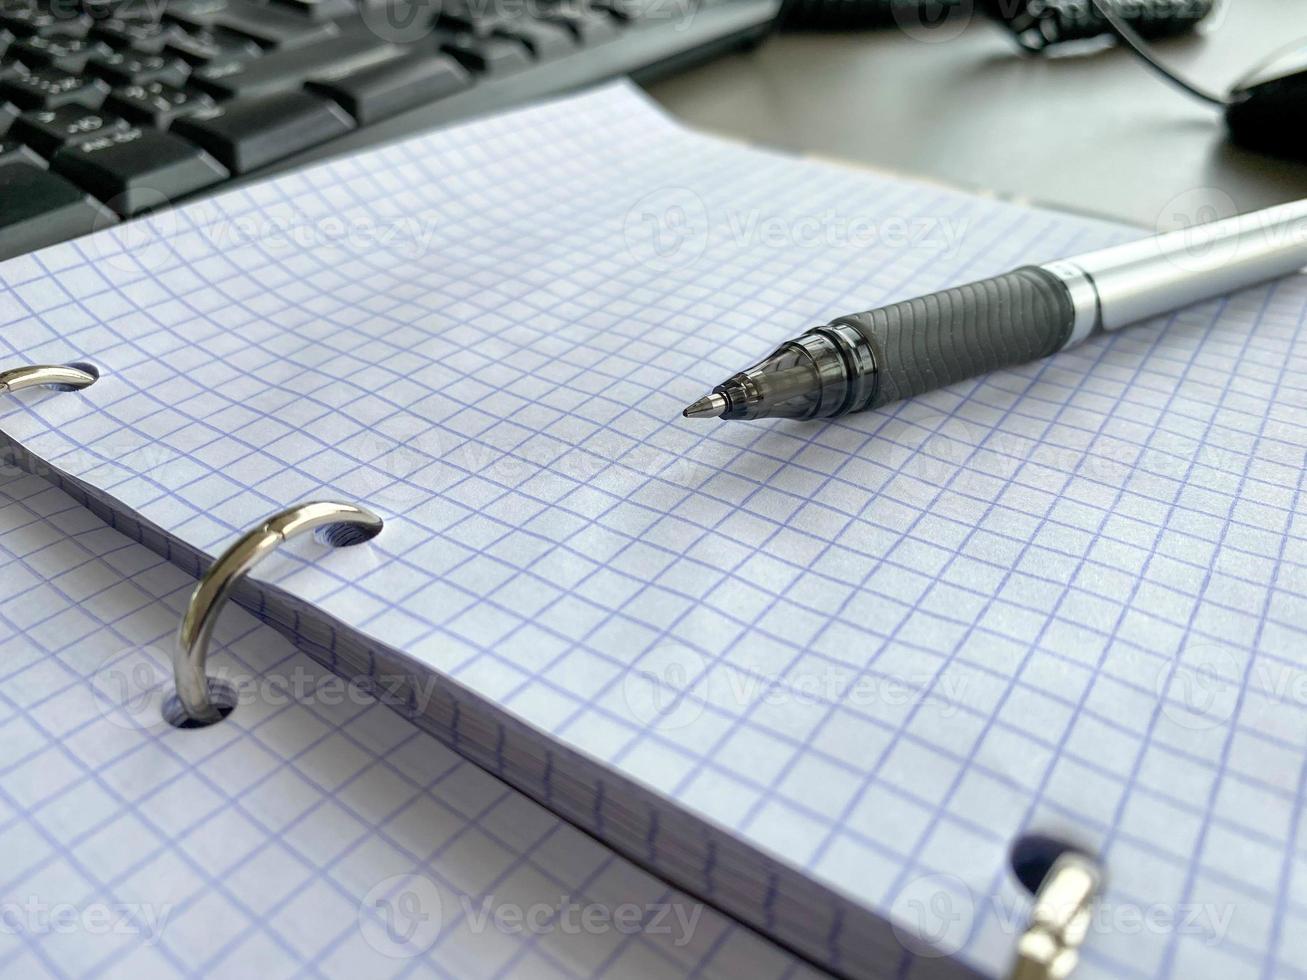 A writing pen rests on a notepad with squared paper sheets on a work desk with stationery in a business office photo